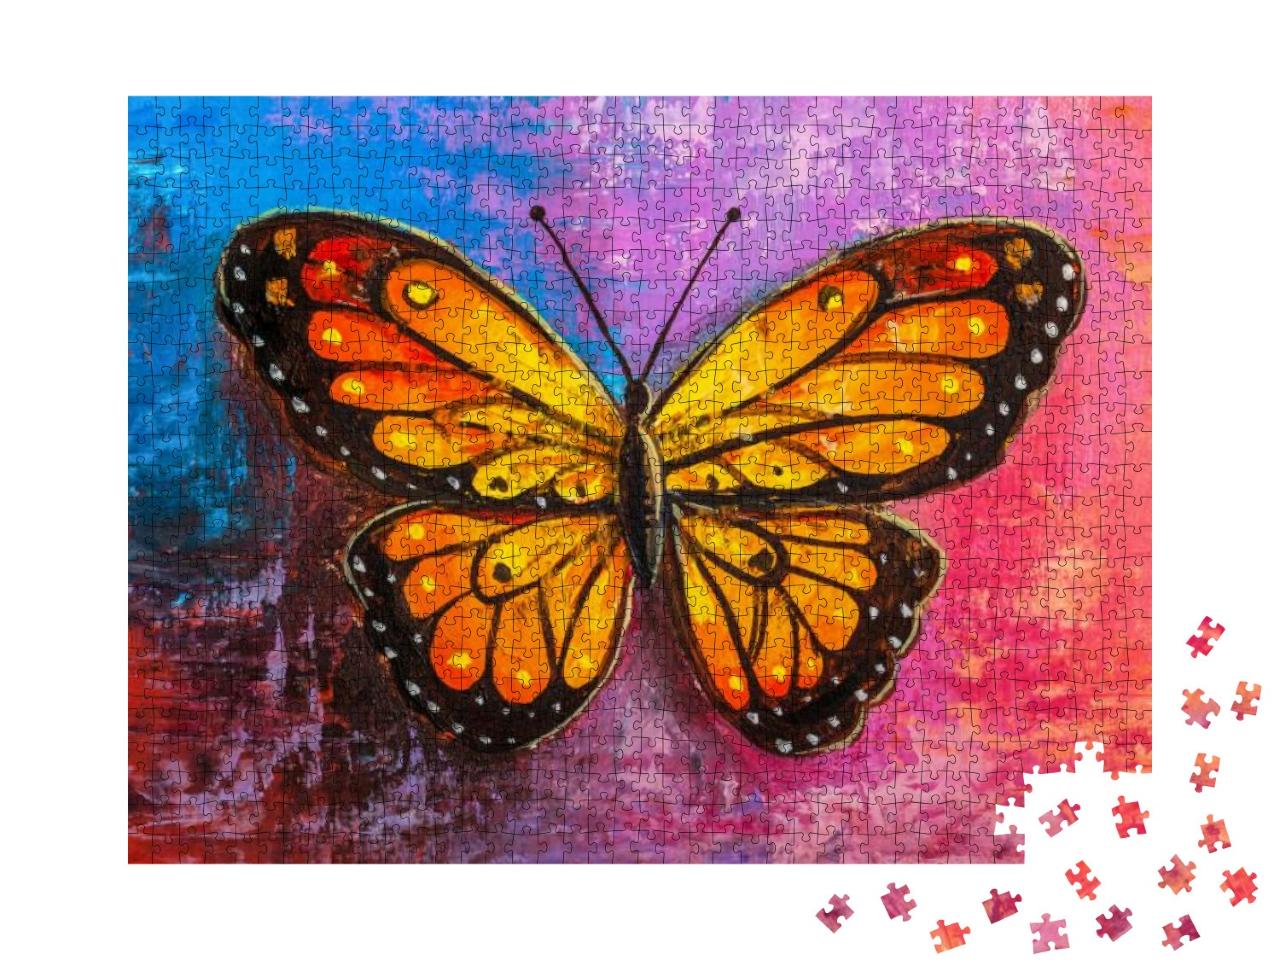 Oil Painting of Monarch Butterfly... Jigsaw Puzzle with 1000 pieces